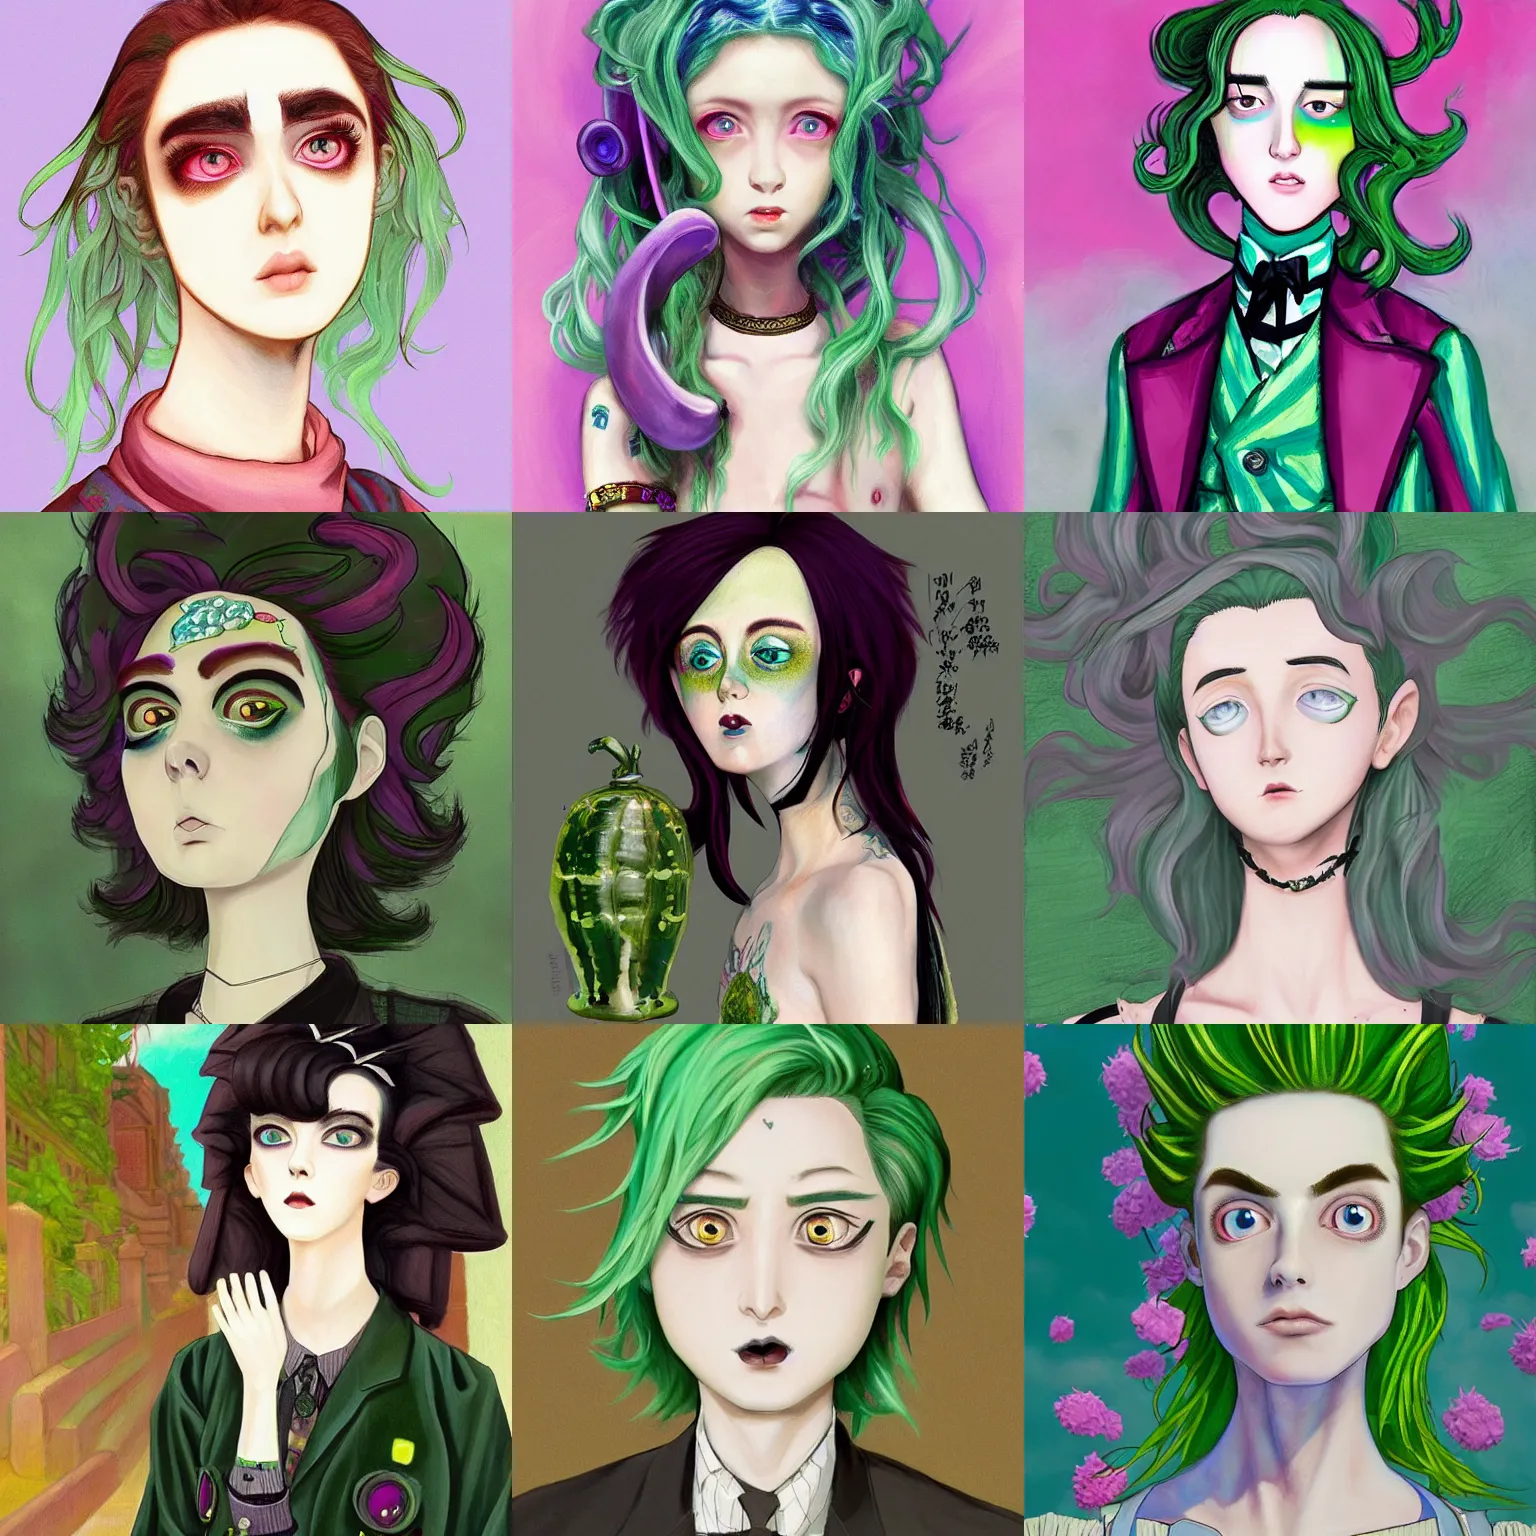 Prompt: Pickle Rick as a beautiful man, non-binary, androgynous, cool tousled hair, style is a blend of John singer Sargent paintings and Japanese shoujo manga, inspired by pastel goth, pre-raphaelite paintings, harajuku street fashion, photorealistic art, insanely beautiful and detailed illustration